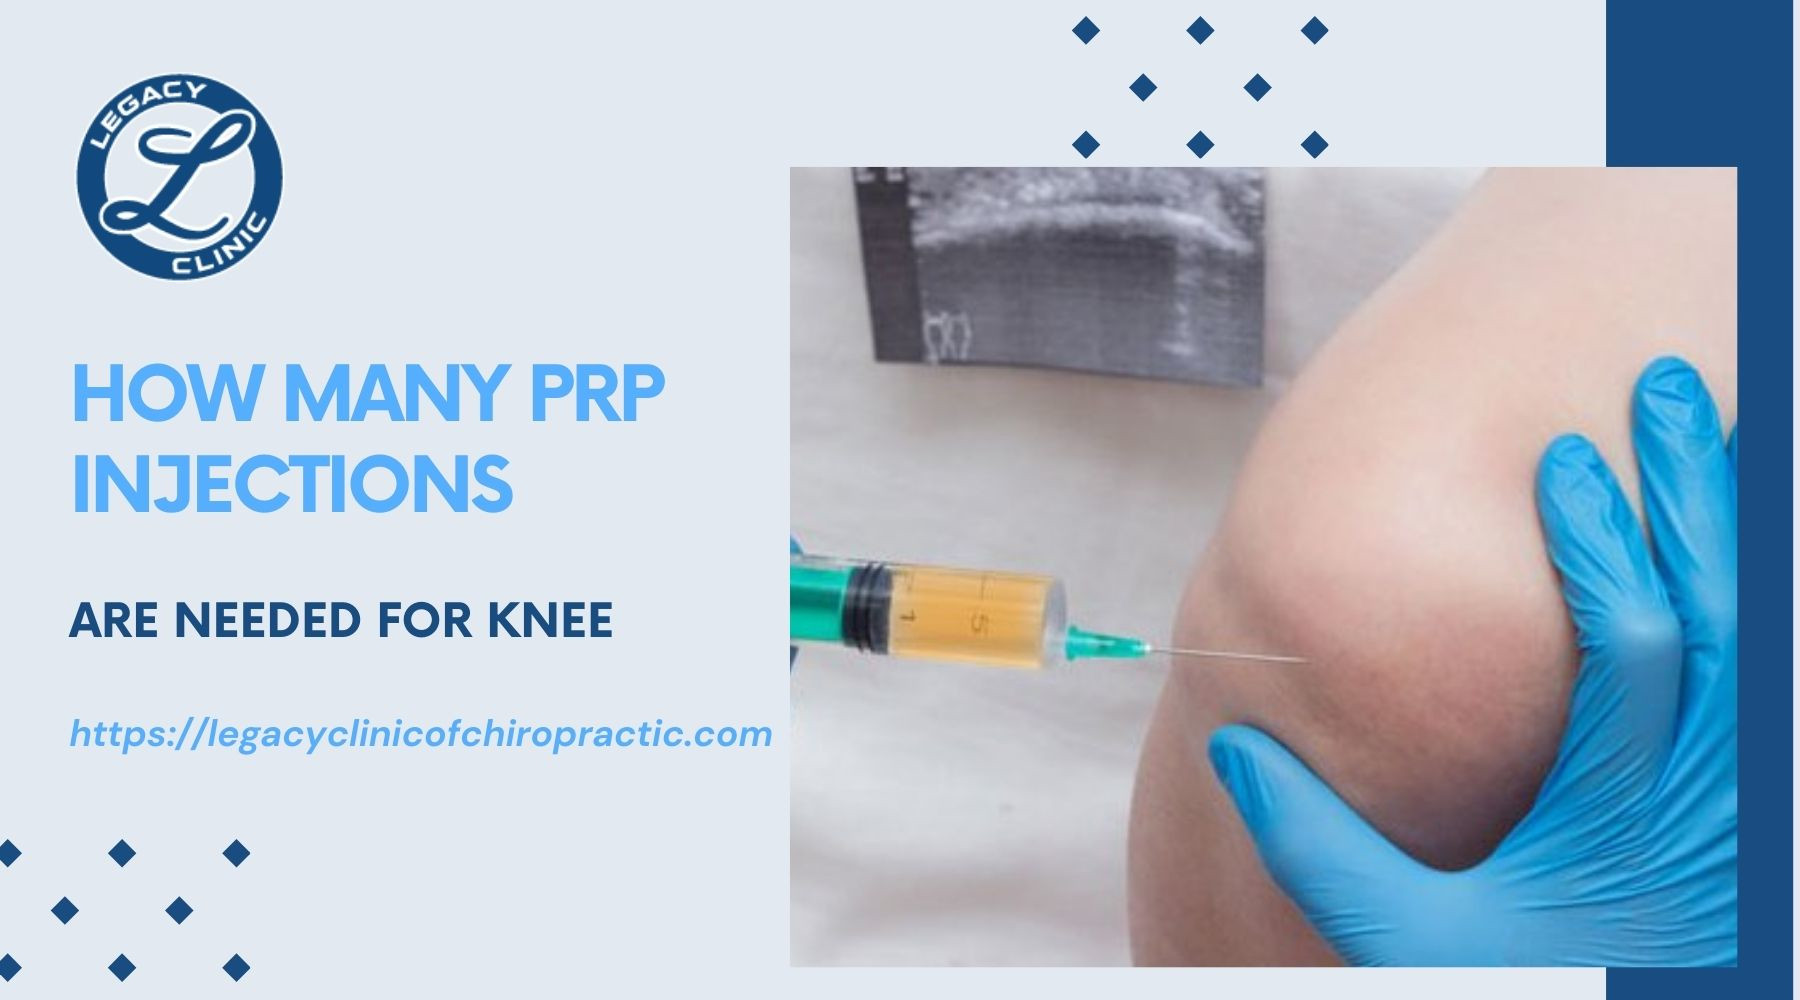 How Many PRP Injections Are Needed For Knee?